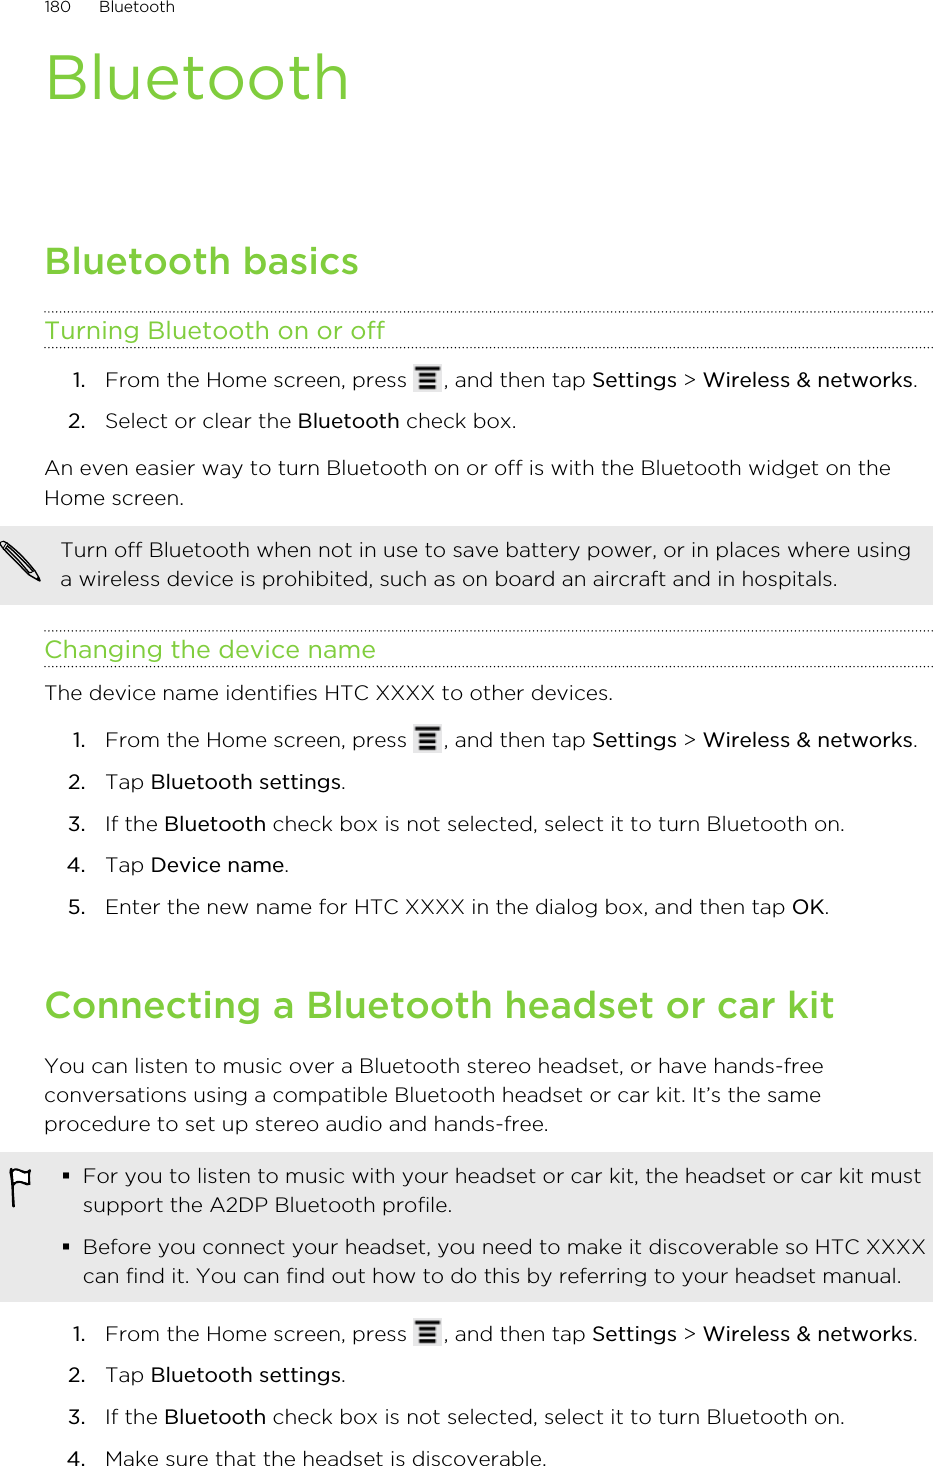 BluetoothBluetooth basicsTurning Bluetooth on or off1. From the Home screen, press  , and then tap Settings &gt; Wireless &amp; networks.2. Select or clear the Bluetooth check box.An even easier way to turn Bluetooth on or off is with the Bluetooth widget on theHome screen.Turn off Bluetooth when not in use to save battery power, or in places where usinga wireless device is prohibited, such as on board an aircraft and in hospitals.Changing the device nameThe device name identifies HTC XXXX to other devices.1. From the Home screen, press  , and then tap Settings &gt; Wireless &amp; networks.2. Tap Bluetooth settings.3. If the Bluetooth check box is not selected, select it to turn Bluetooth on.4. Tap Device name.5. Enter the new name for HTC XXXX in the dialog box, and then tap OK.Connecting a Bluetooth headset or car kitYou can listen to music over a Bluetooth stereo headset, or have hands-freeconversations using a compatible Bluetooth headset or car kit. It’s the sameprocedure to set up stereo audio and hands-free.§For you to listen to music with your headset or car kit, the headset or car kit mustsupport the A2DP Bluetooth profile.§Before you connect your headset, you need to make it discoverable so HTC XXXXcan find it. You can find out how to do this by referring to your headset manual.1. From the Home screen, press  , and then tap Settings &gt; Wireless &amp; networks.2. Tap Bluetooth settings.3. If the Bluetooth check box is not selected, select it to turn Bluetooth on.4. Make sure that the headset is discoverable.180 Bluetooth